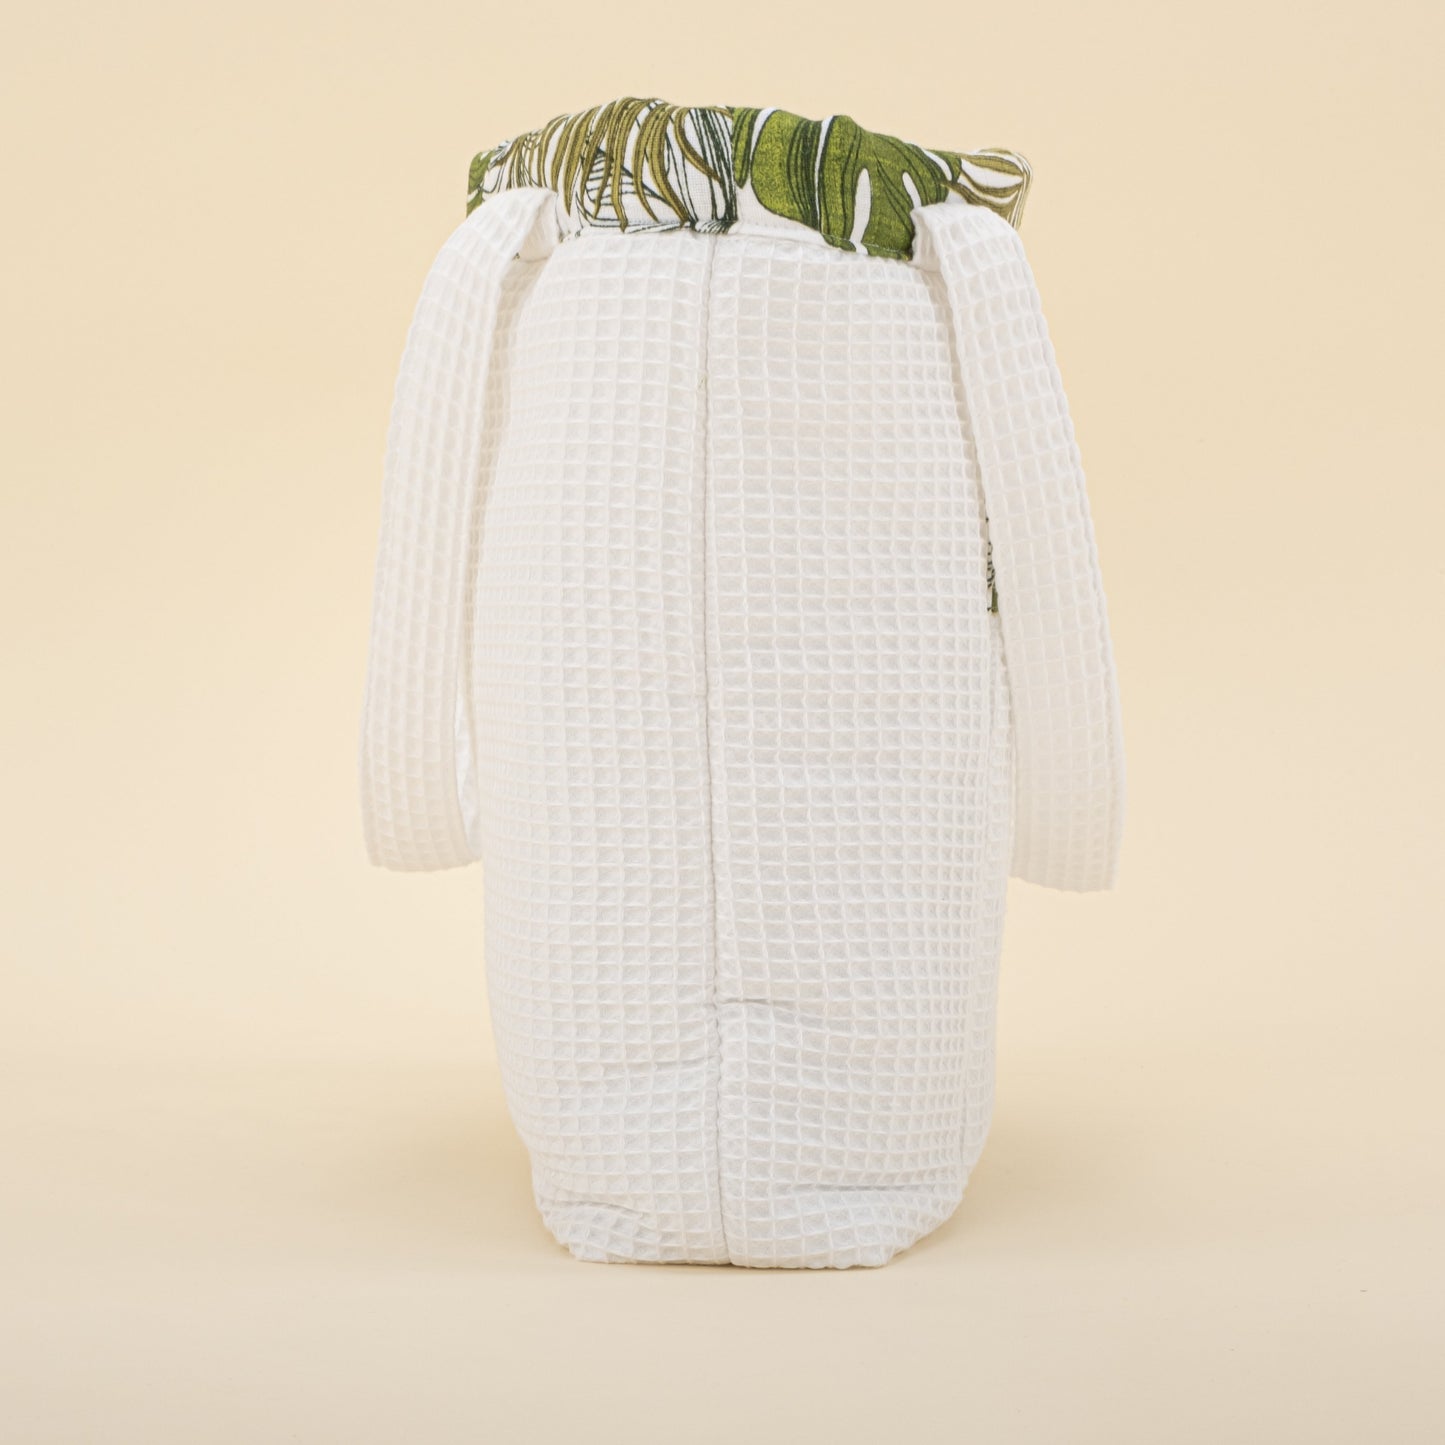 Baby Care Bag - White Honeycomb - Palm Leaves